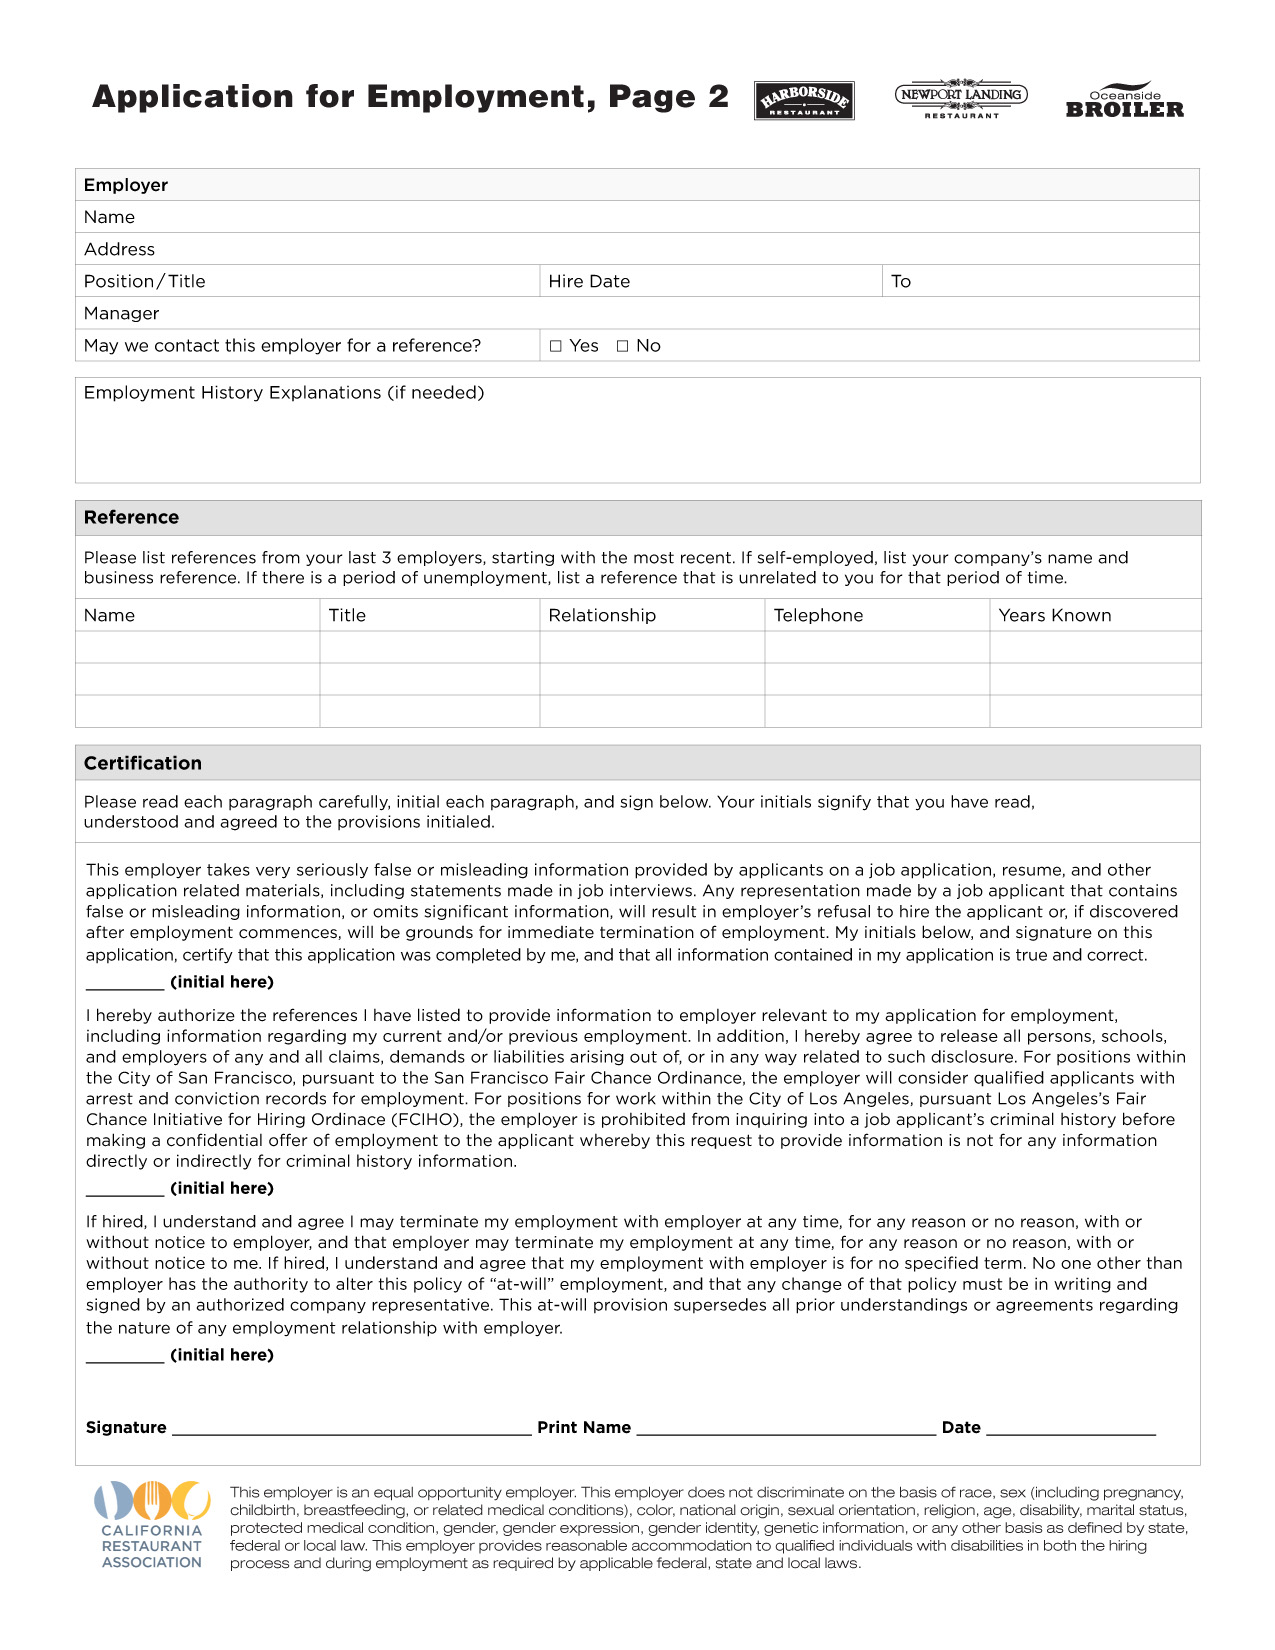 Employee Application Page 2